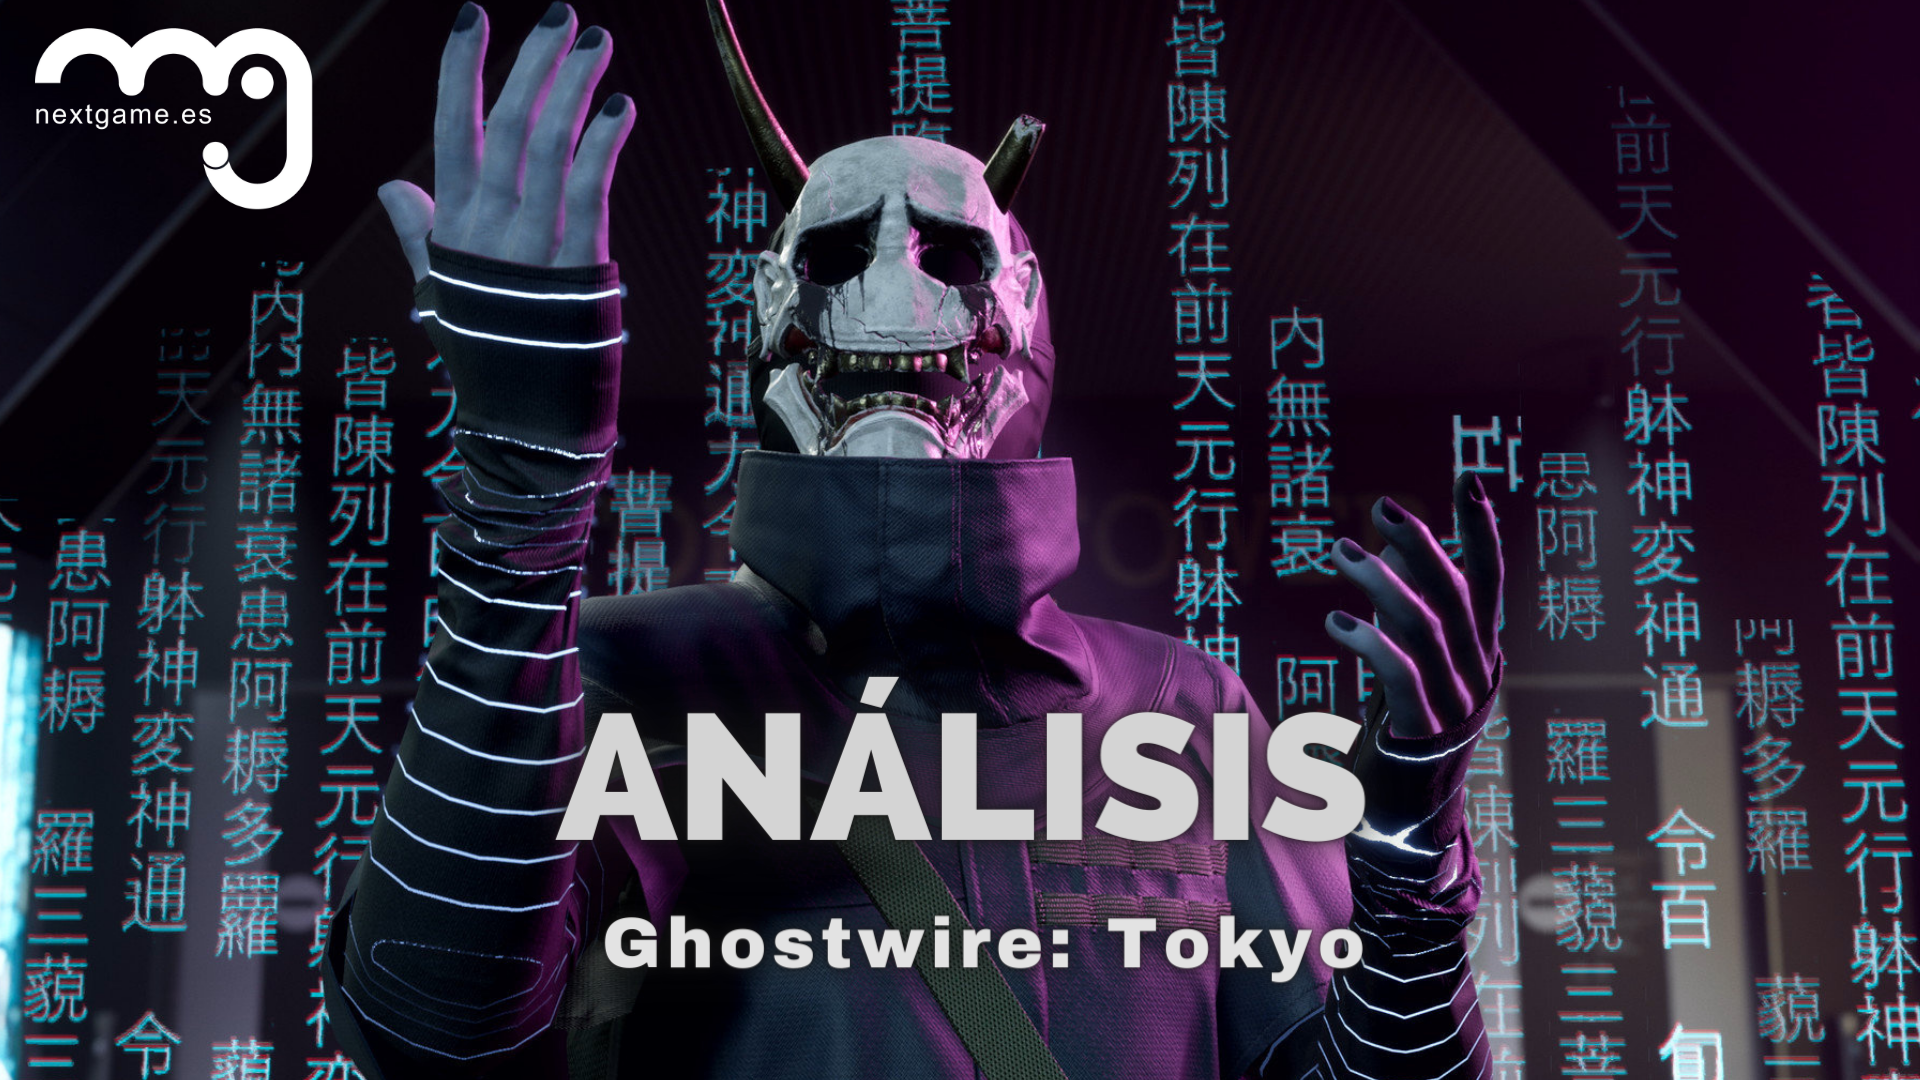 analisis ghostwire tokyo